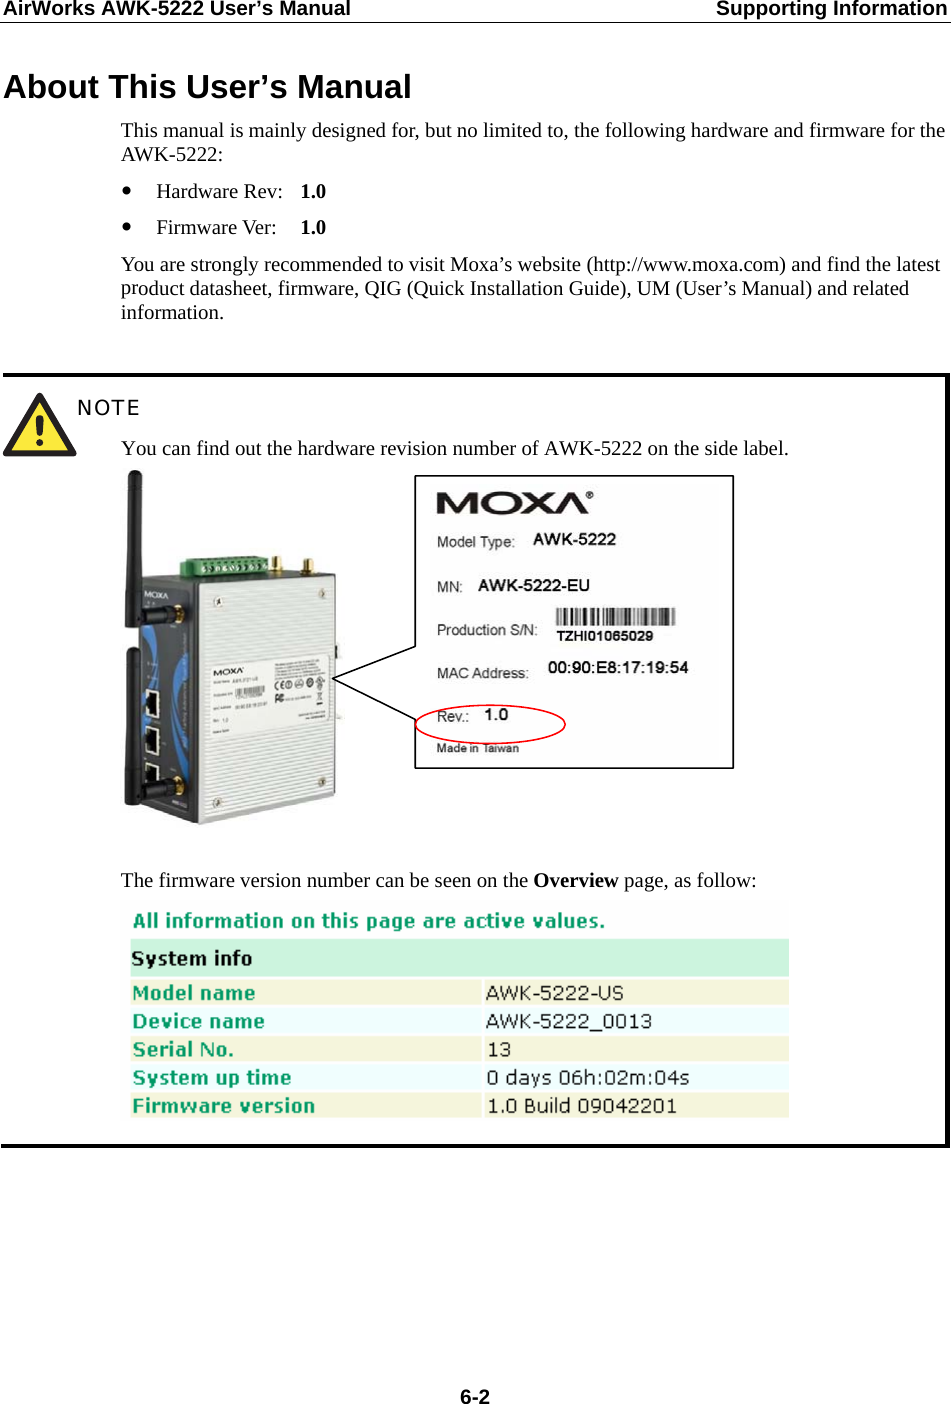 AirWorks AWK-5222 User’s Manual  Supporting Information  6-2About This User’s Manual This manual is mainly designed for, but no limited to, the following hardware and firmware for the AWK-5222: y Hardware Rev:   1.0 y Firmware Ver:    1.0 You are strongly recommended to visit Moxa’s website (http://www.moxa.com) and find the latest product datasheet, firmware, QIG (Quick Installation Guide), UM (User’s Manual) and related information.   NOTE You can find out the hardware revision number of AWK-5222 on the side label.   The firmware version number can be seen on the Overview page, as follow:       